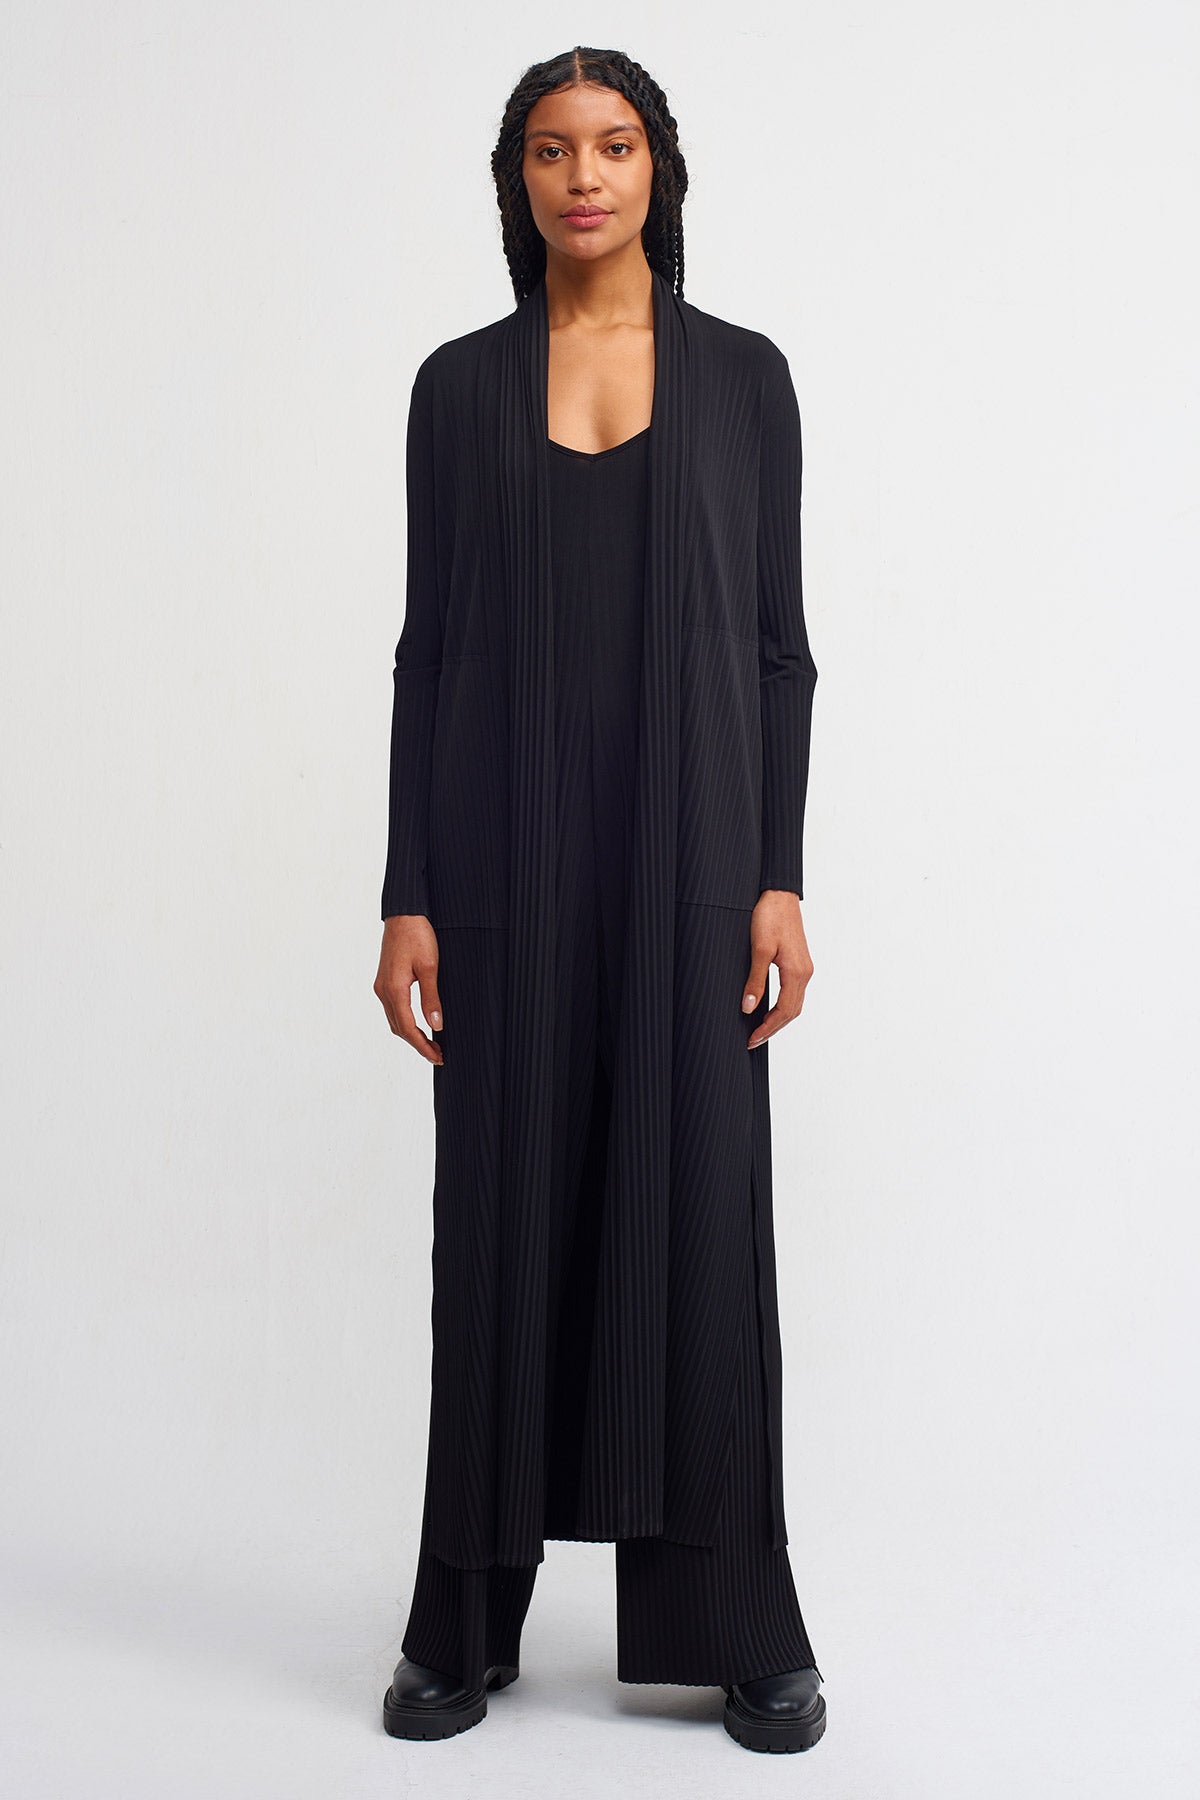 Black Long Pleated Cardigan with Slit Detail-K235015092